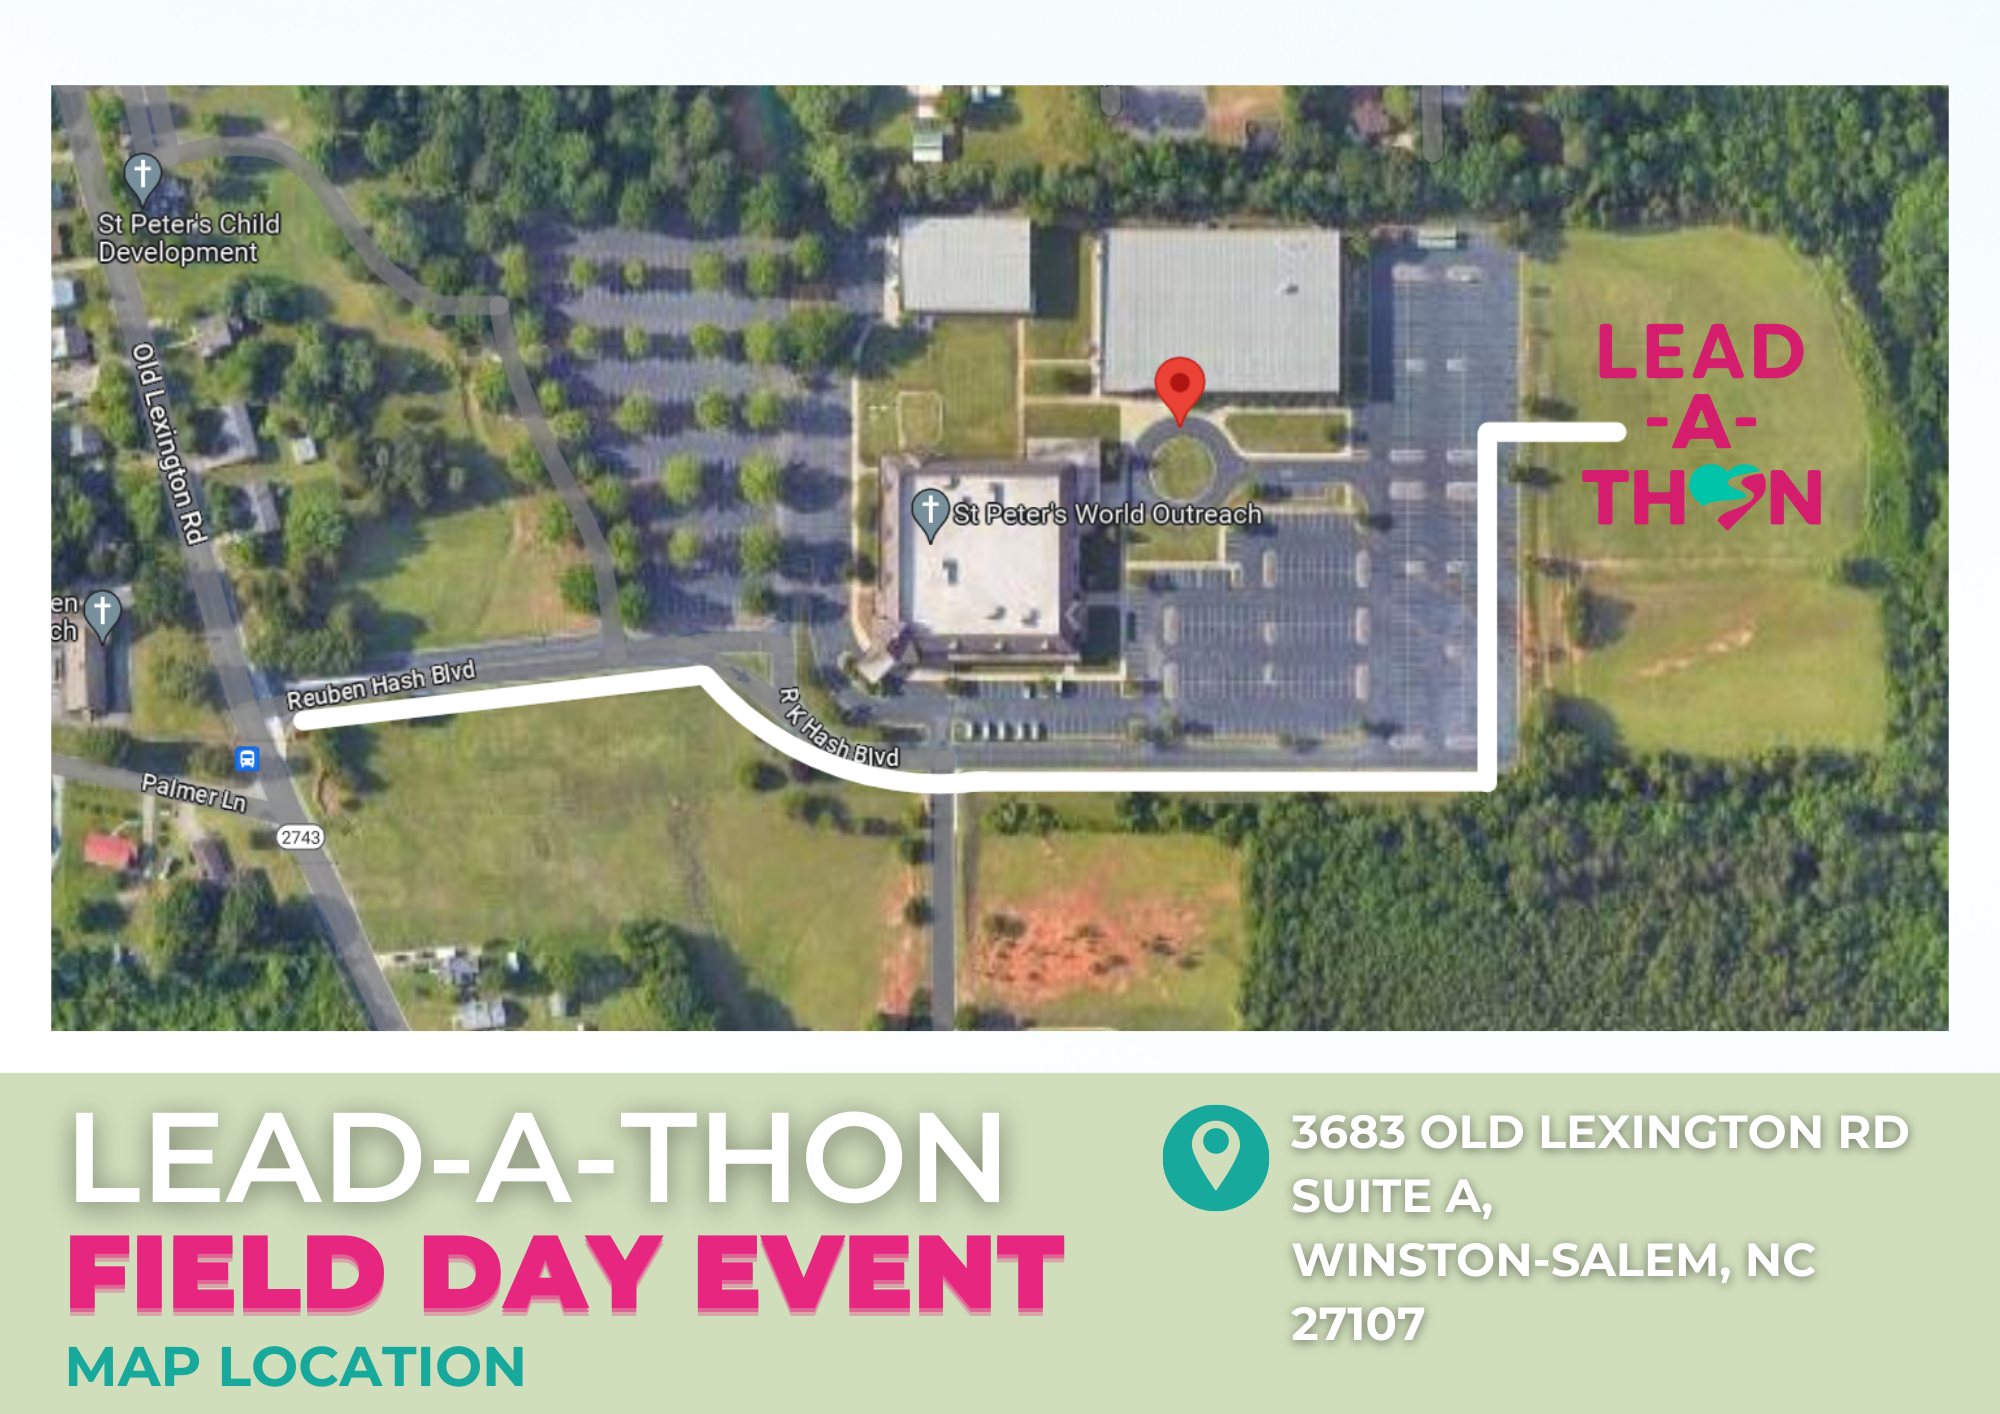 LEAD-A-THON Field Day Location of Event